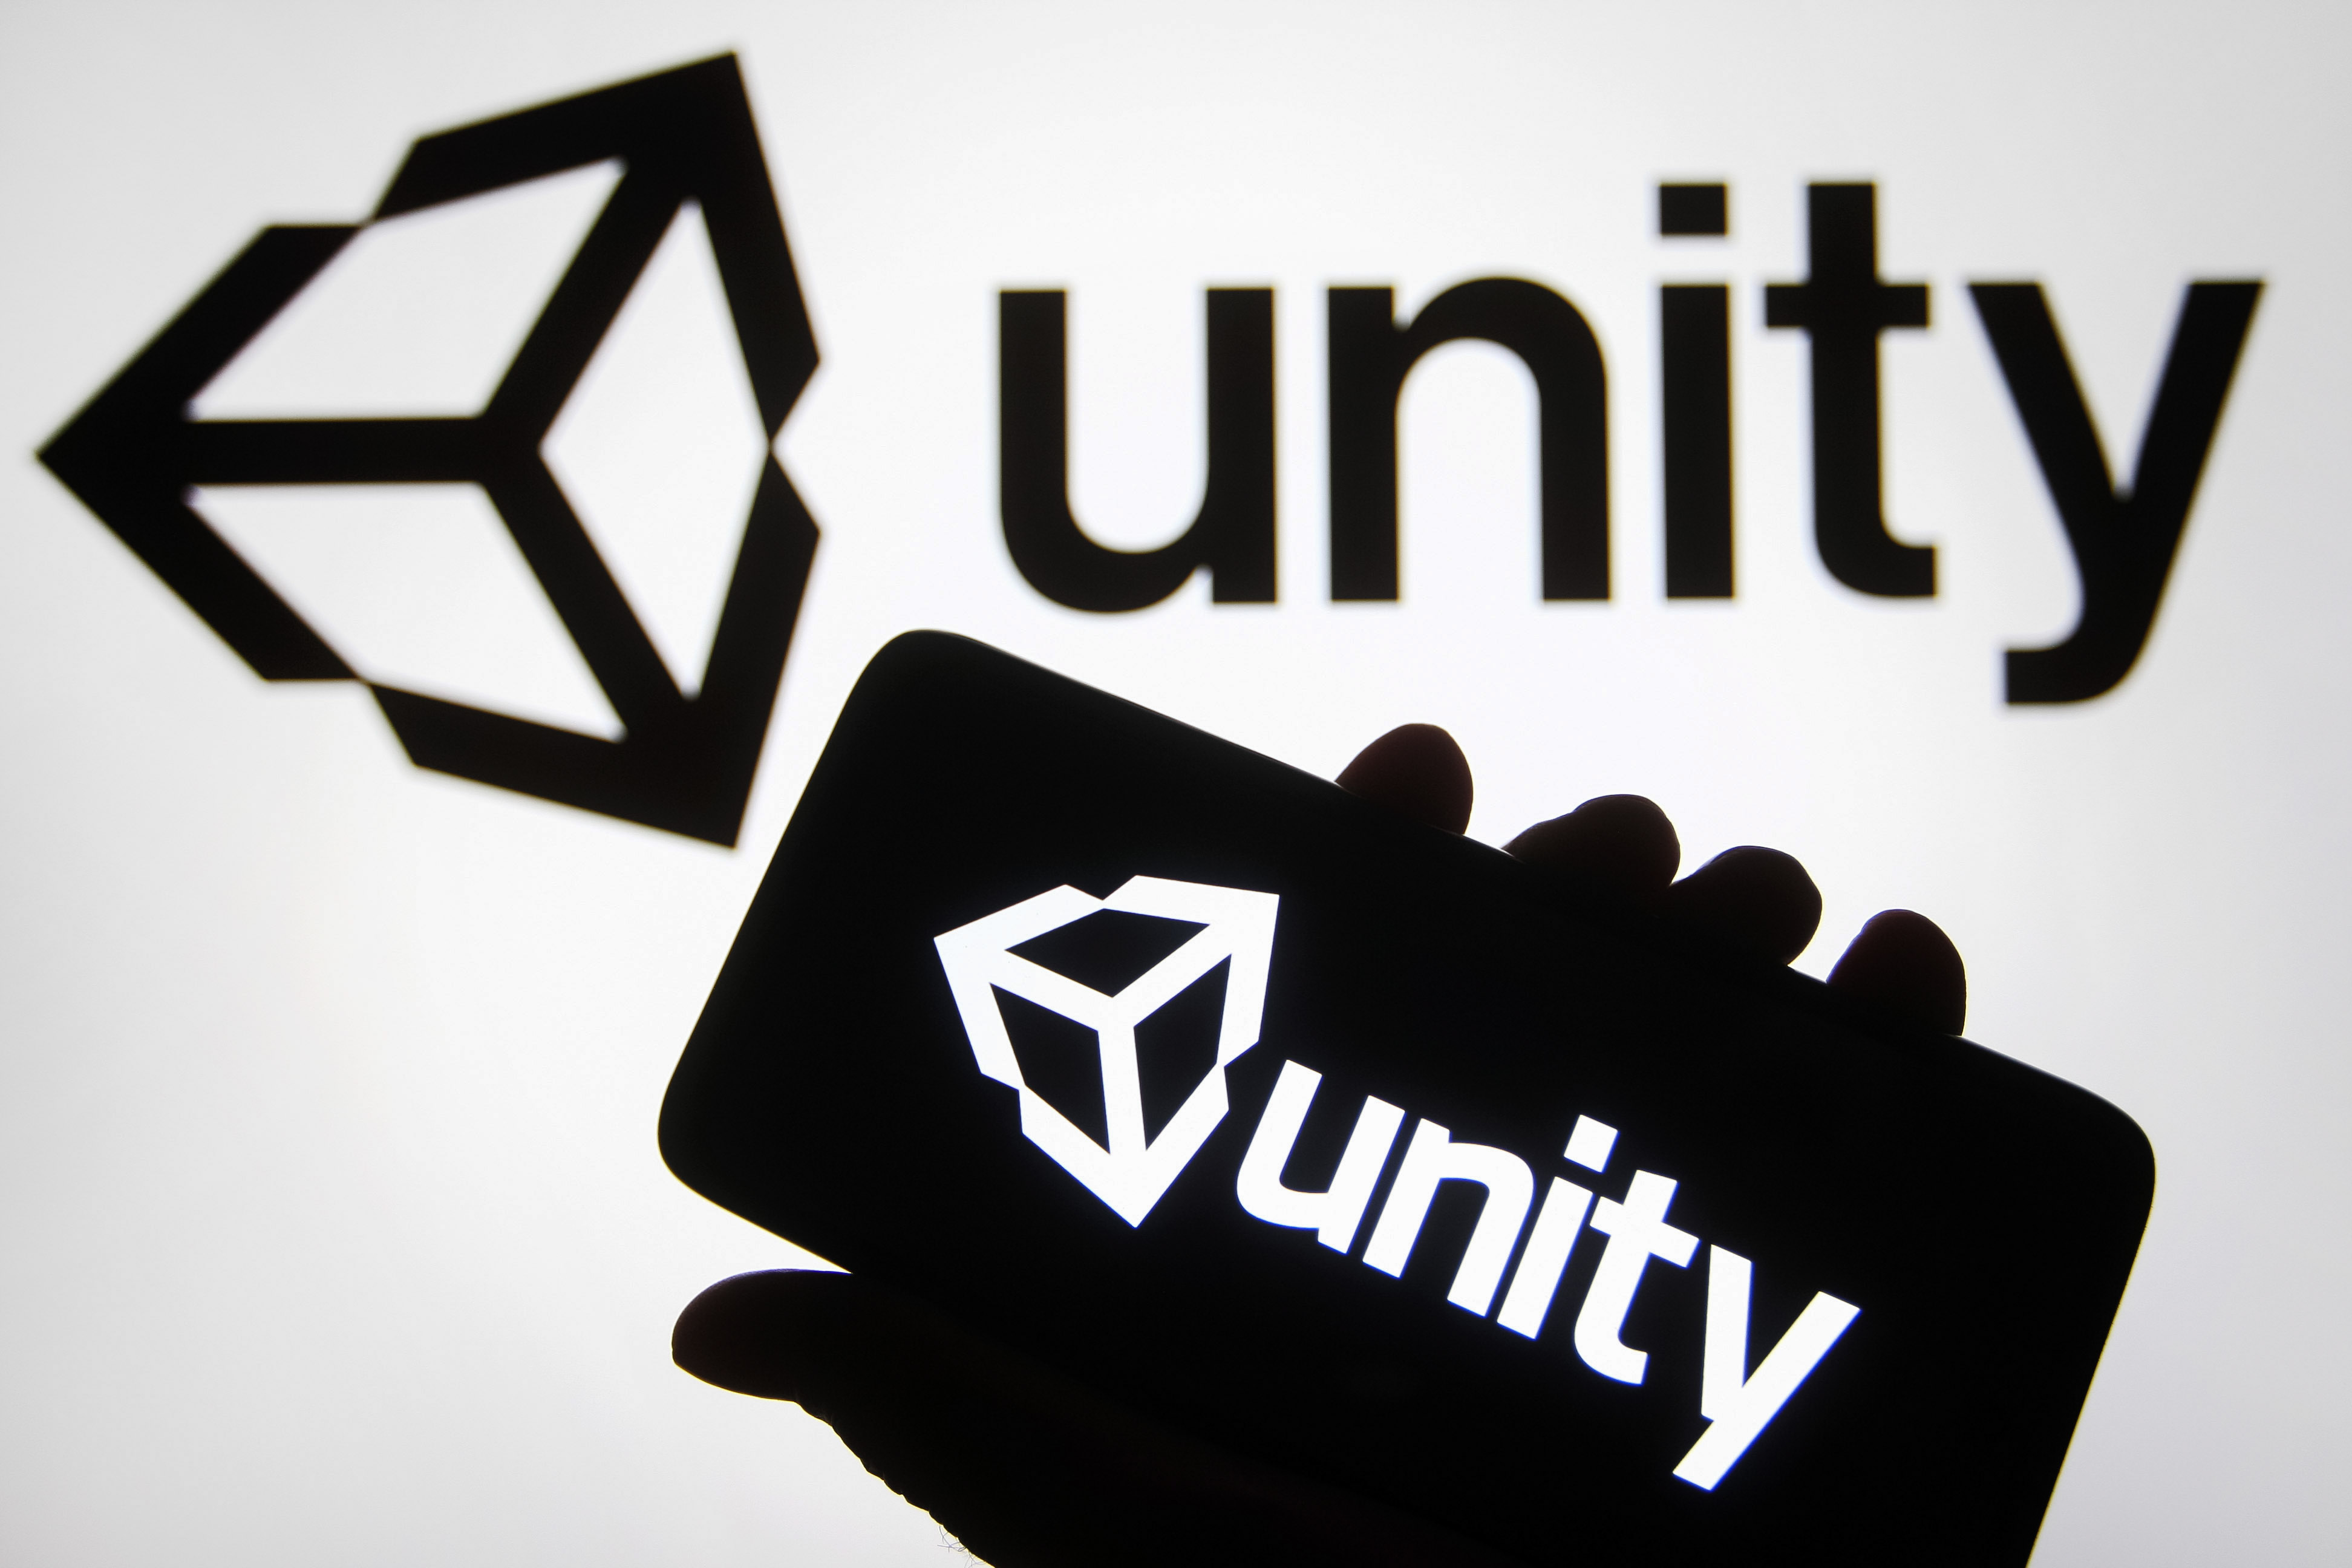 Unity Technologies co-founder goes indie to make his own games